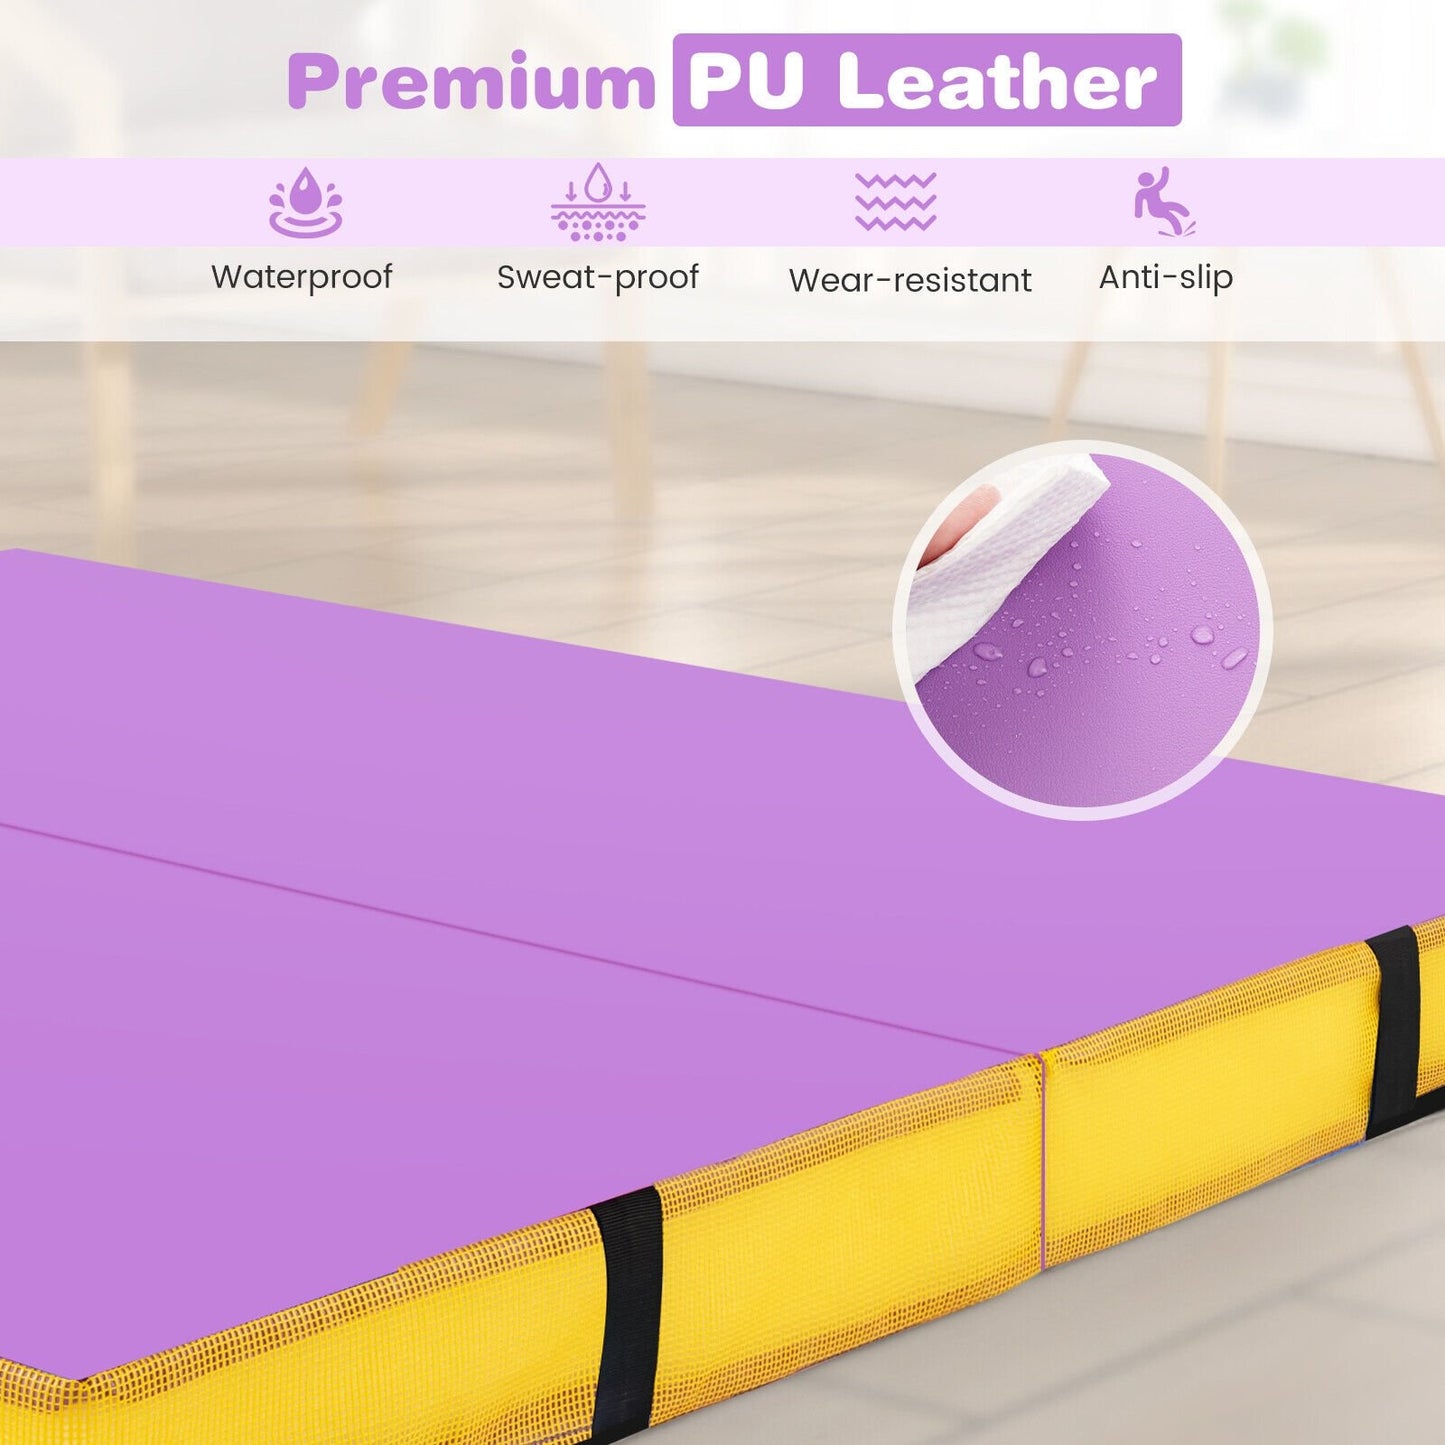 4ft x 4ft x 4in Bi-Folding Gymnastic Tumbling Mat with Handles and Cover, Purple - Gallery Canada